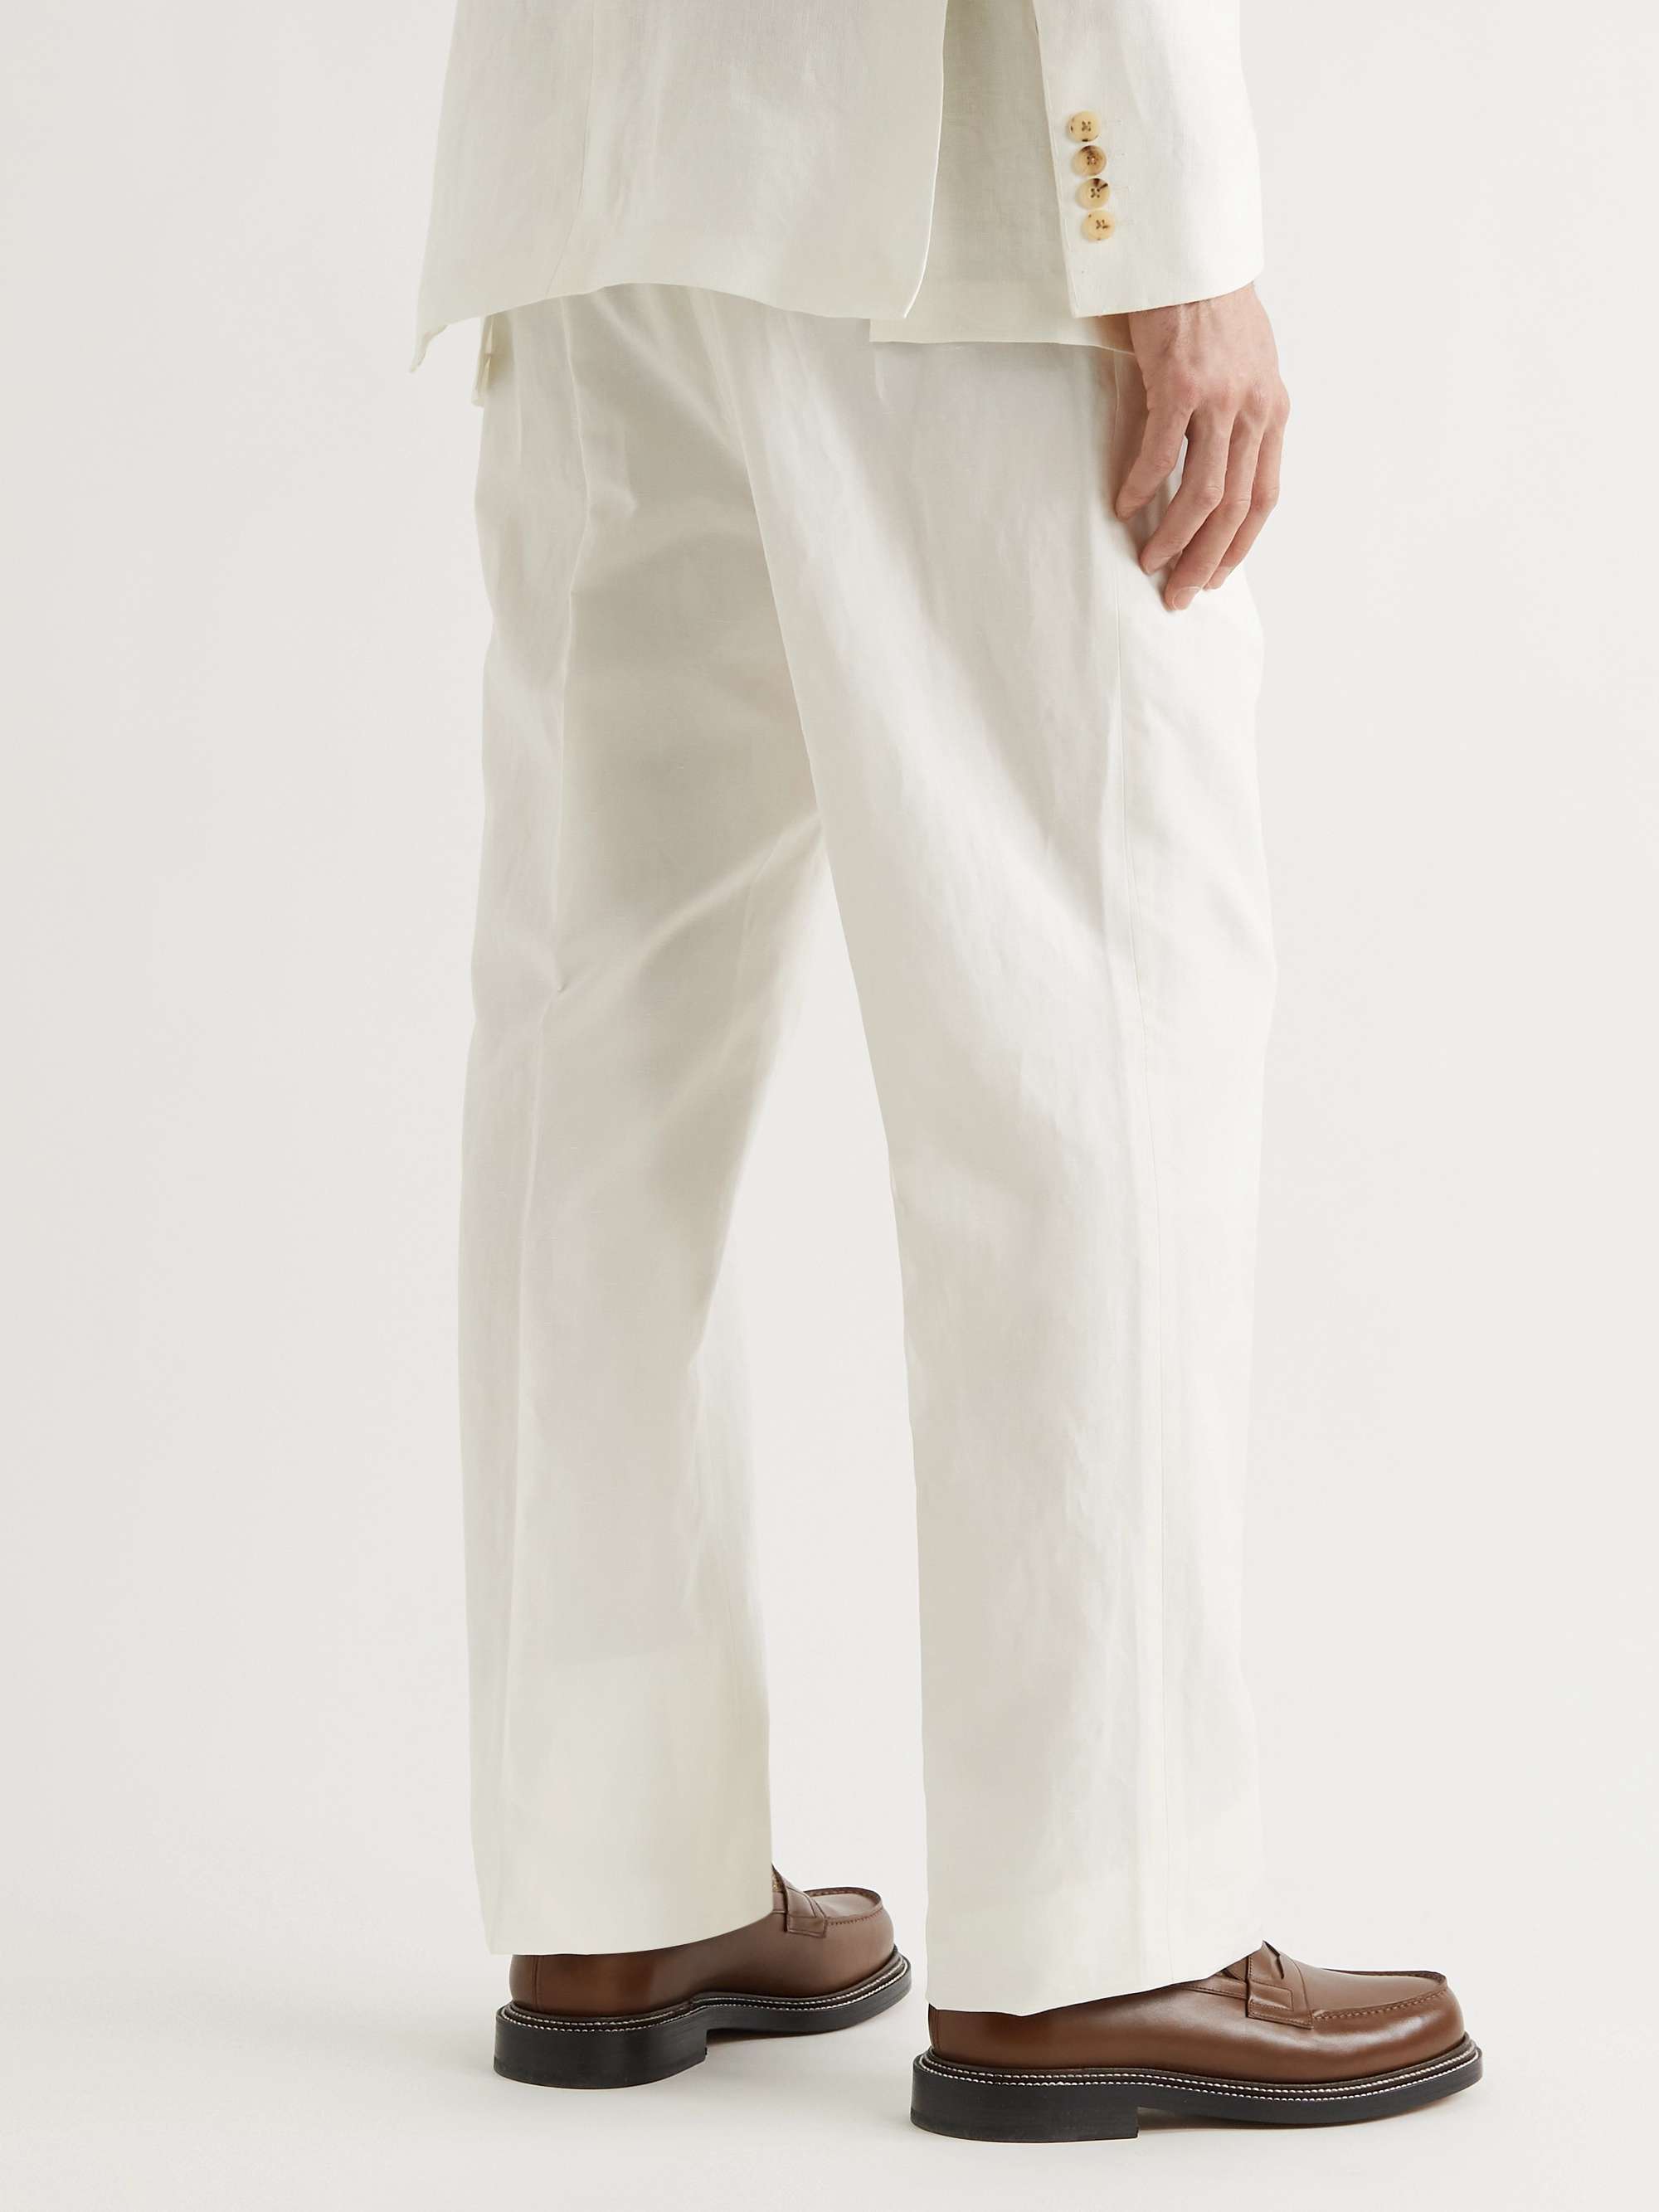 RICHARD JAMES Pleated Cotton and Linen-Blend Trousers